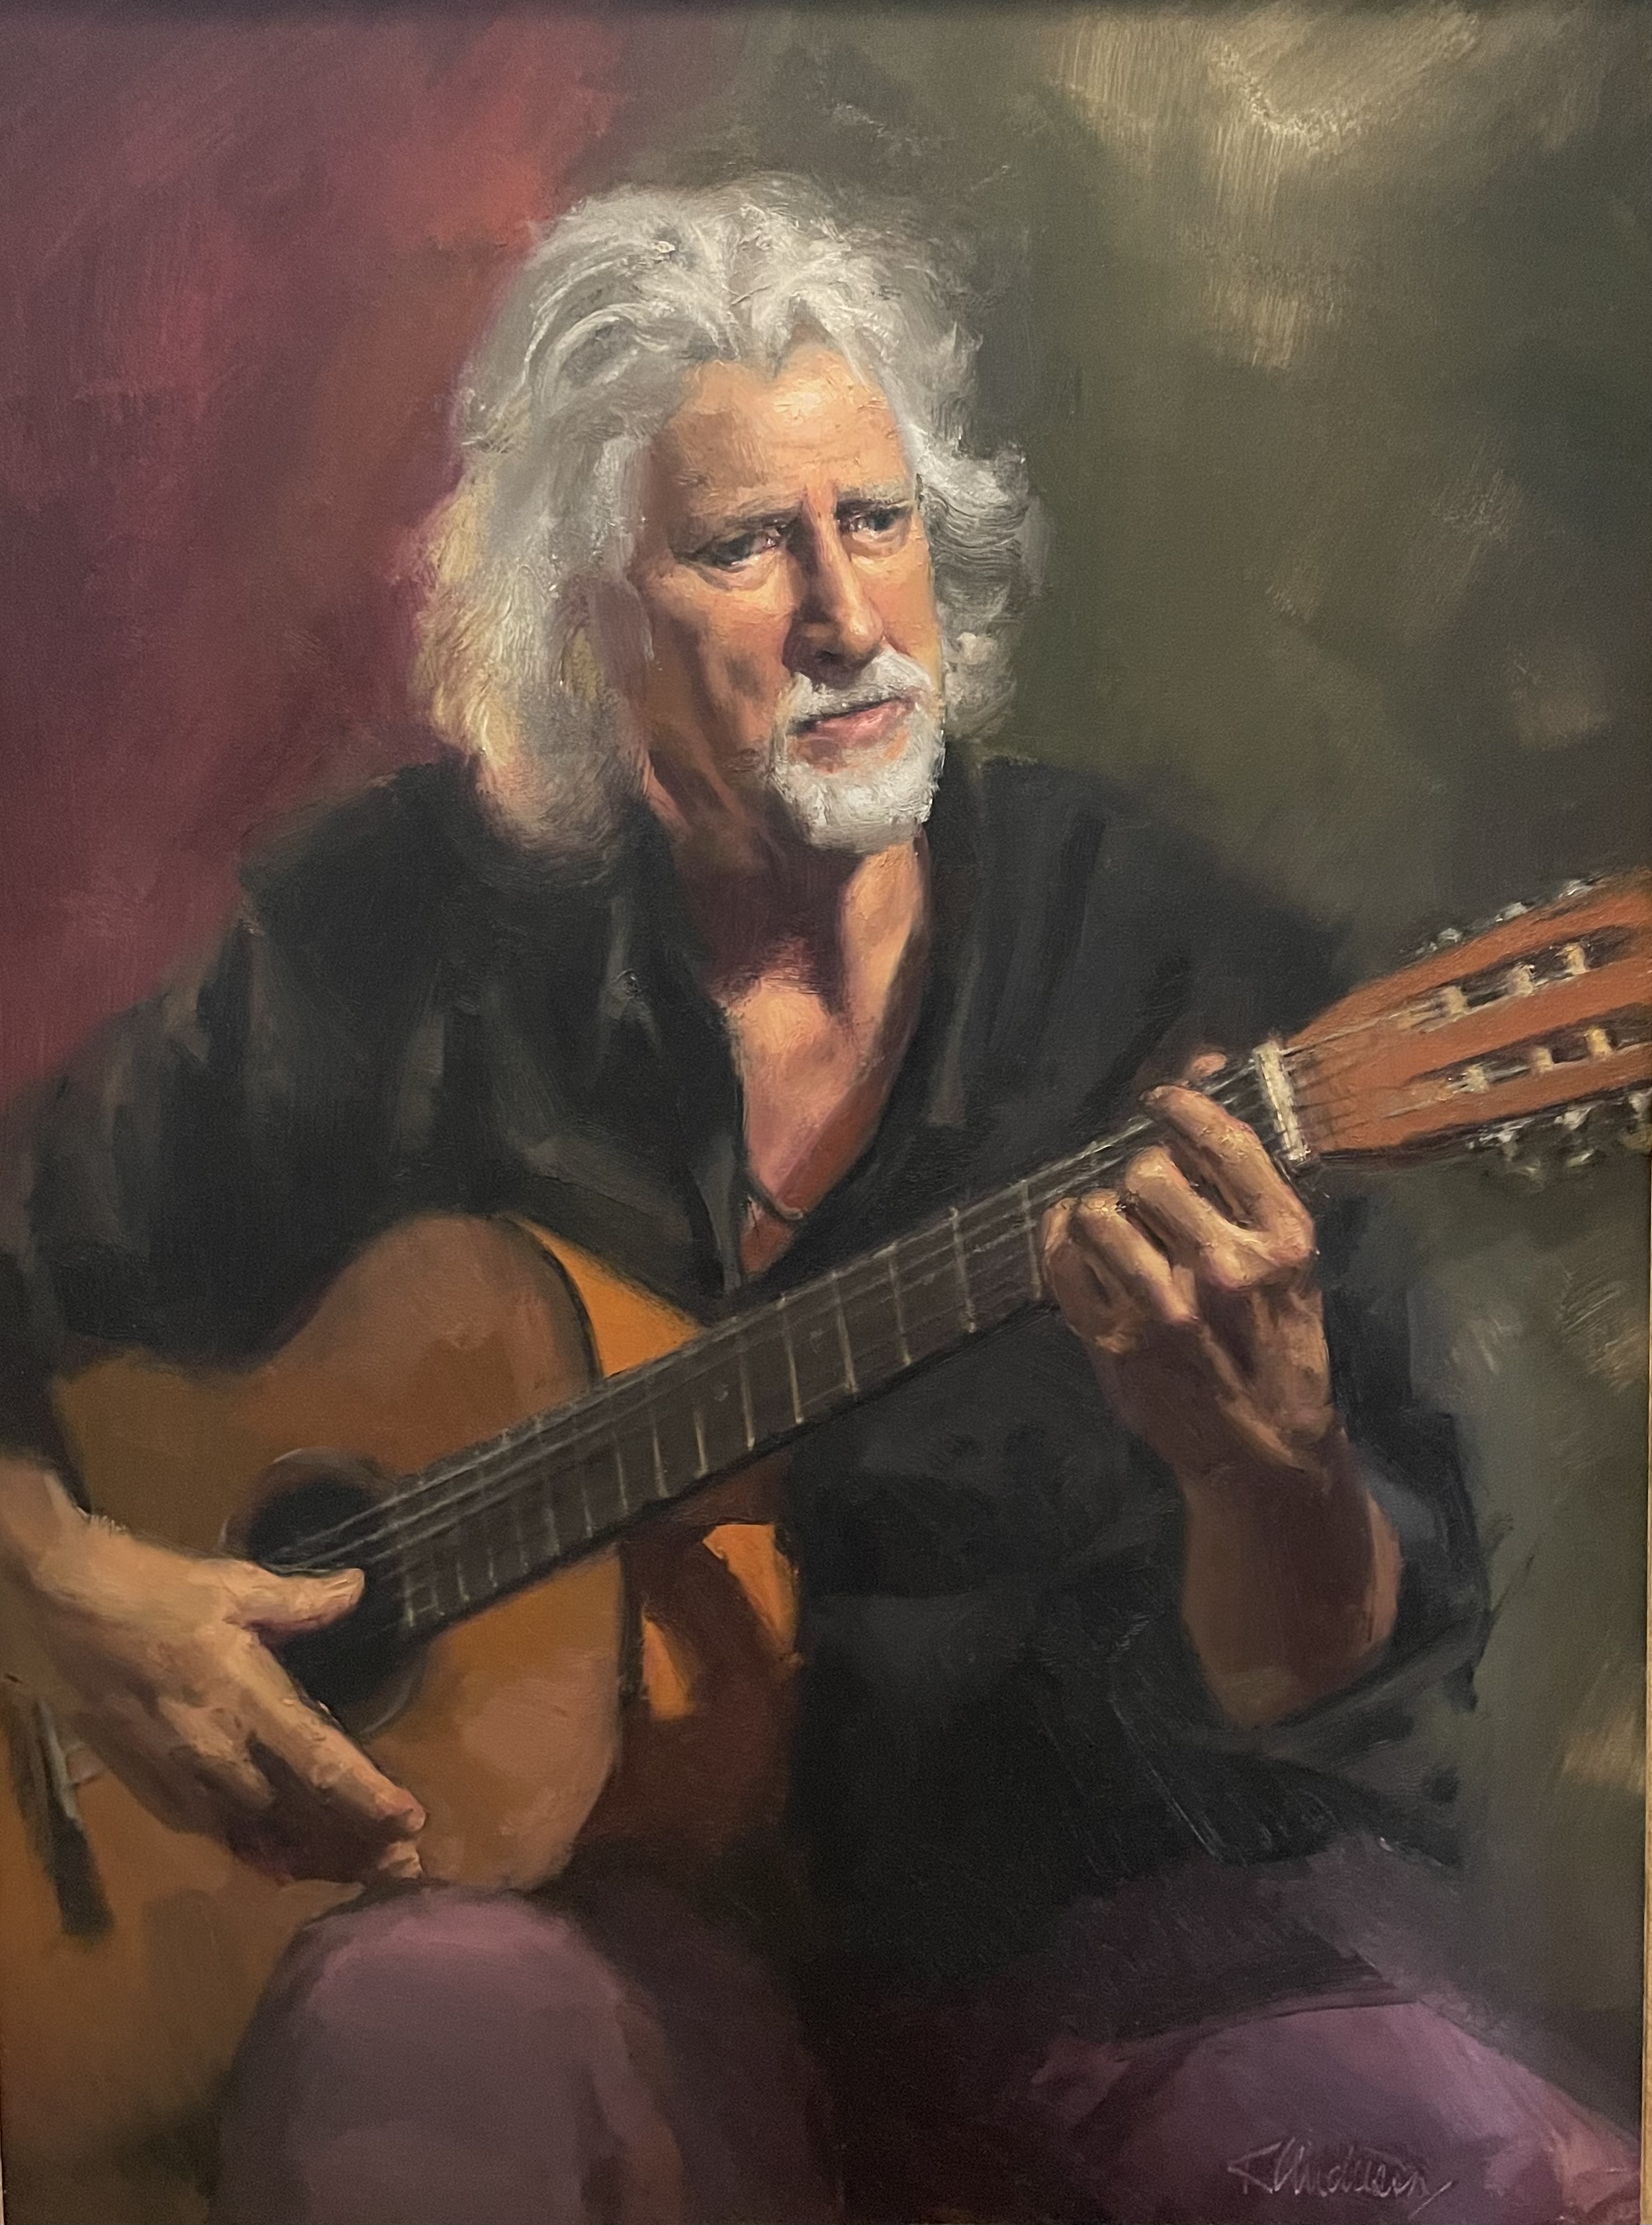 painting of.a man playing a guitar